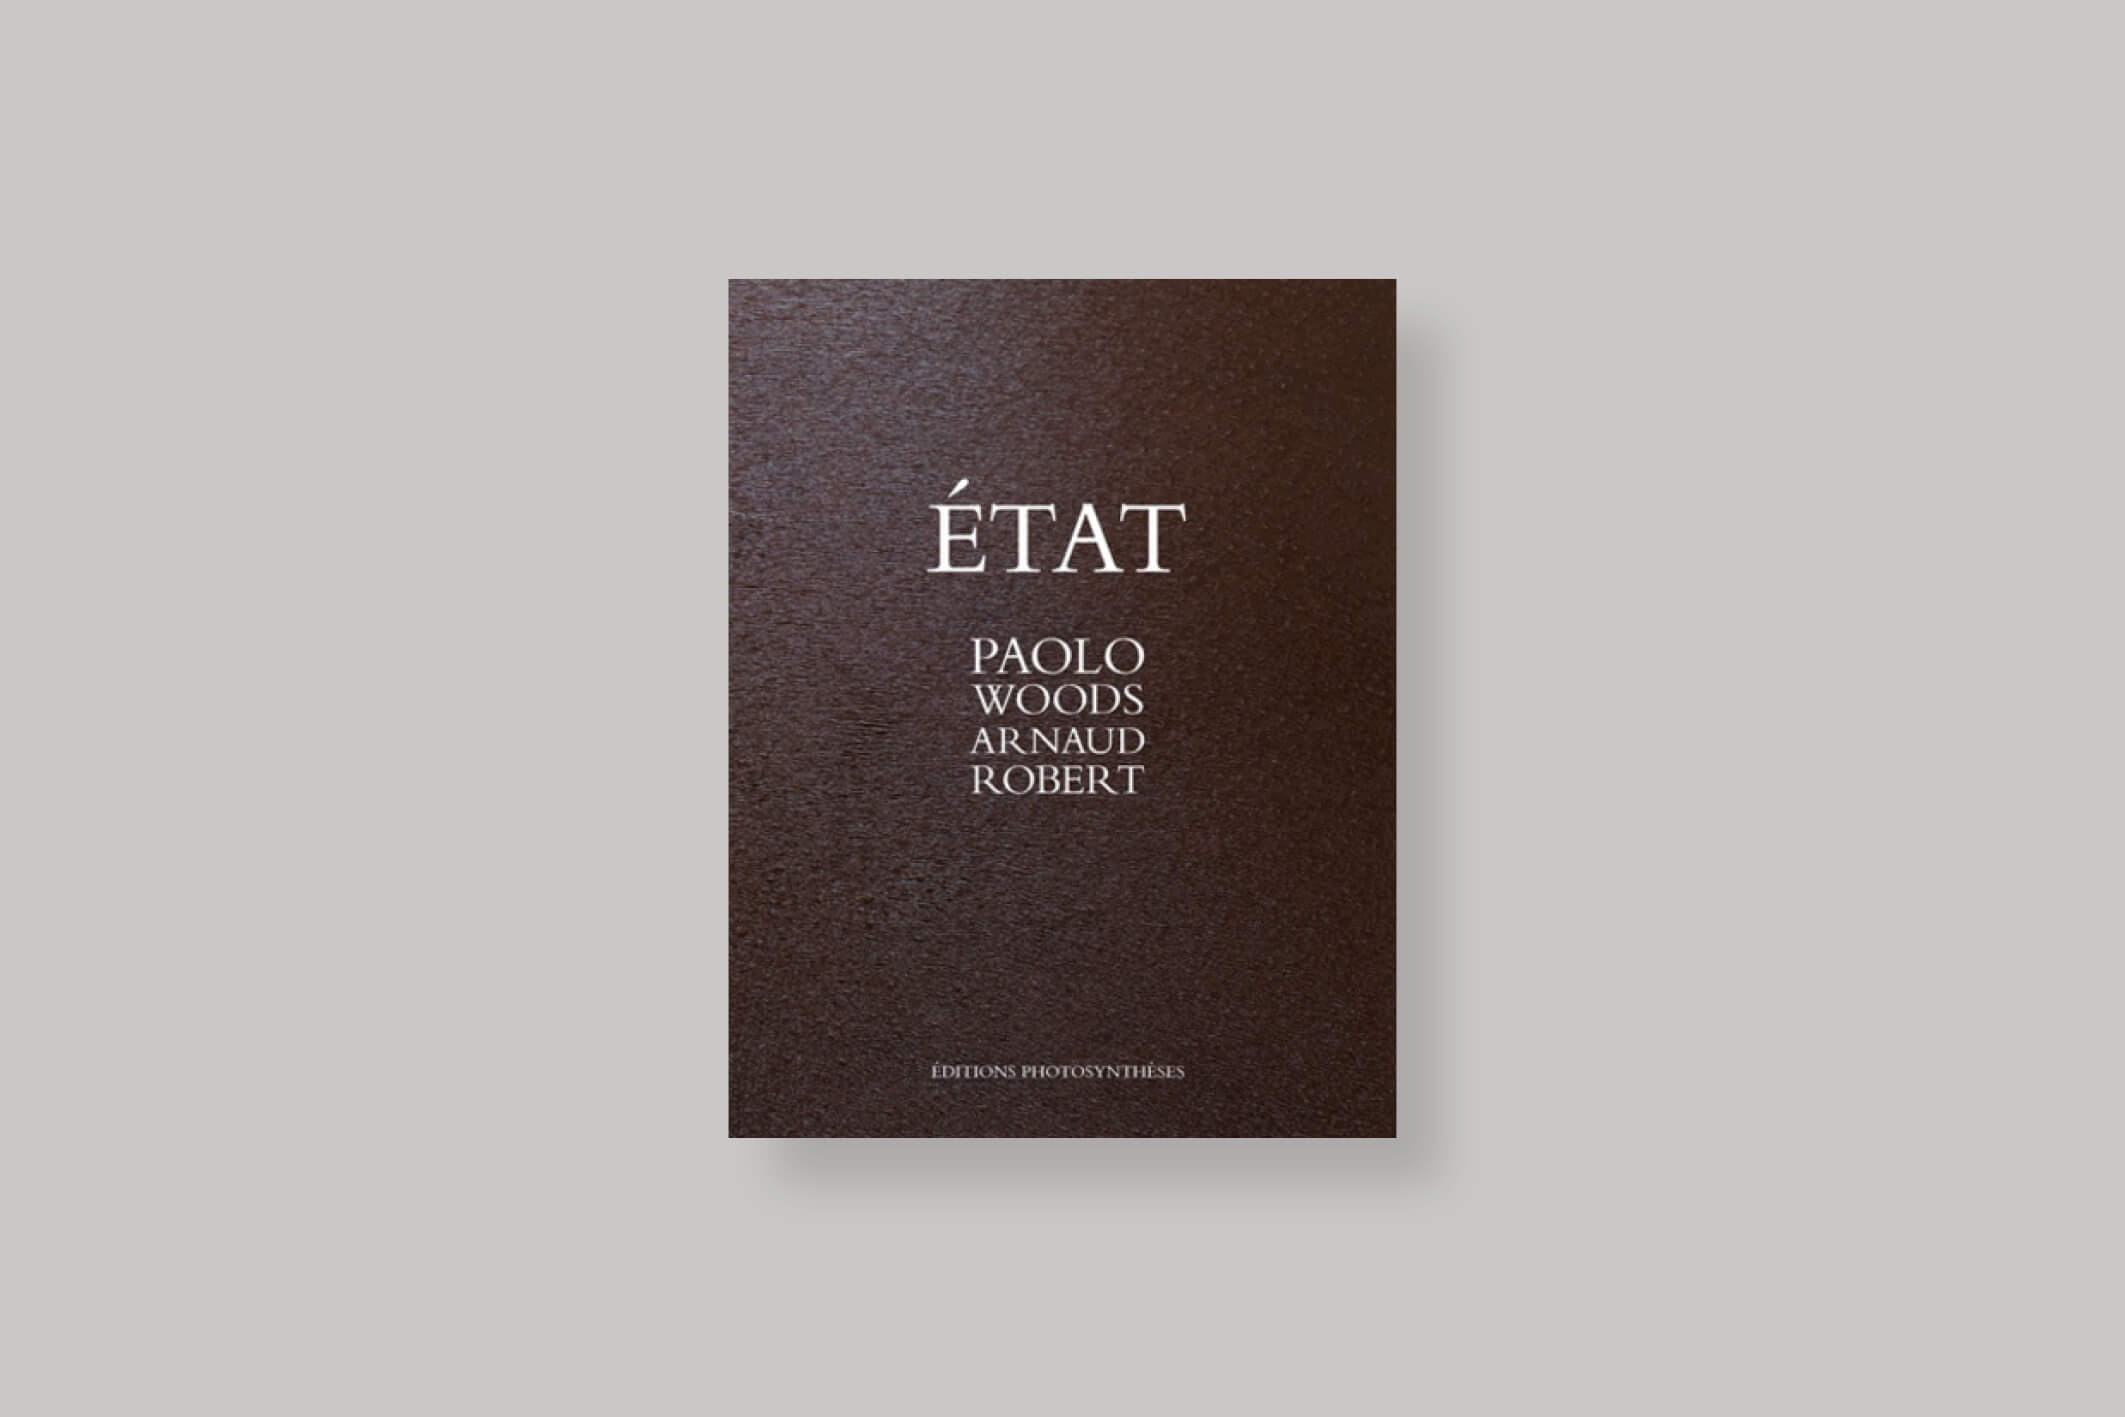 Etat-Paolo-Woods-editions-photosyntheses-cover